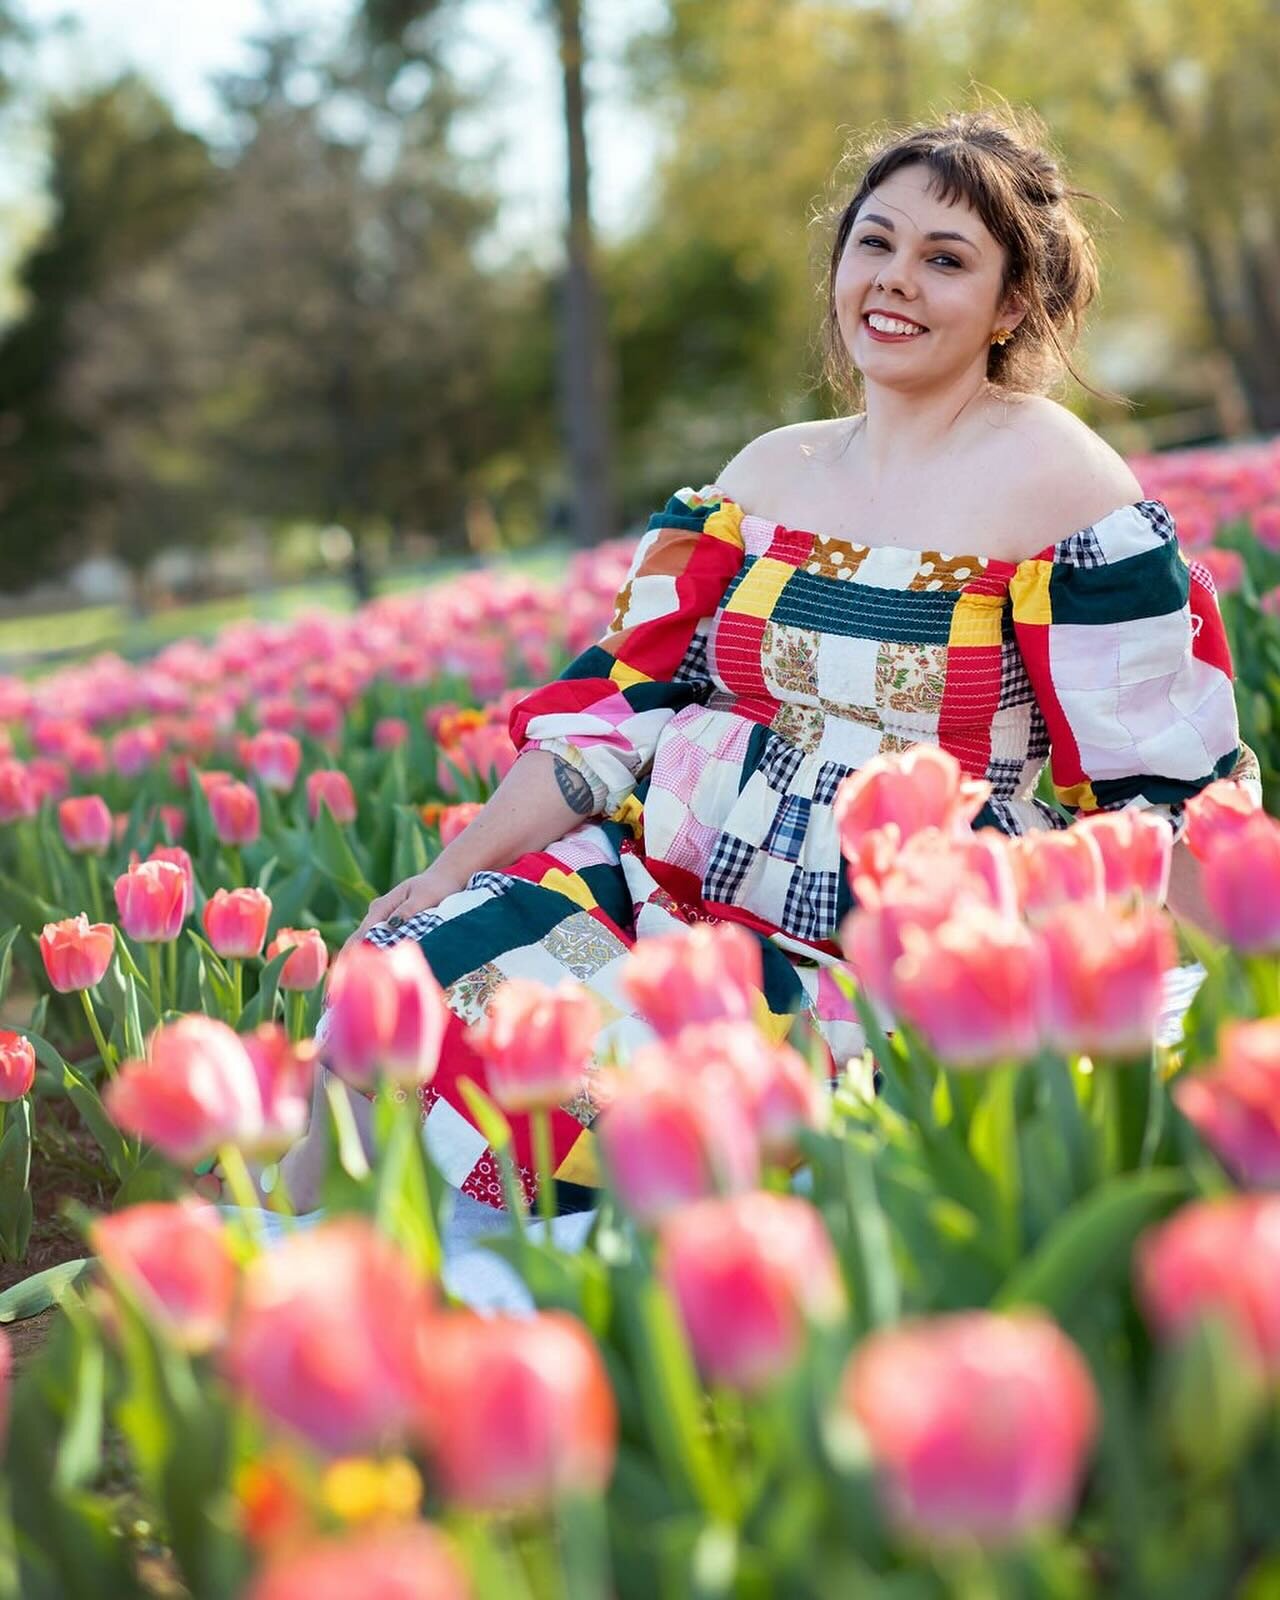 🌷Now Booking Tulip Mini Sessions! 🌷

You do not want to miss this absolute dream of a location! Just ask the lovely @angietherose pictured here&hellip; these tulip fields inspired a whole series of her paintings! 🥰

There are 3 spots left - book v